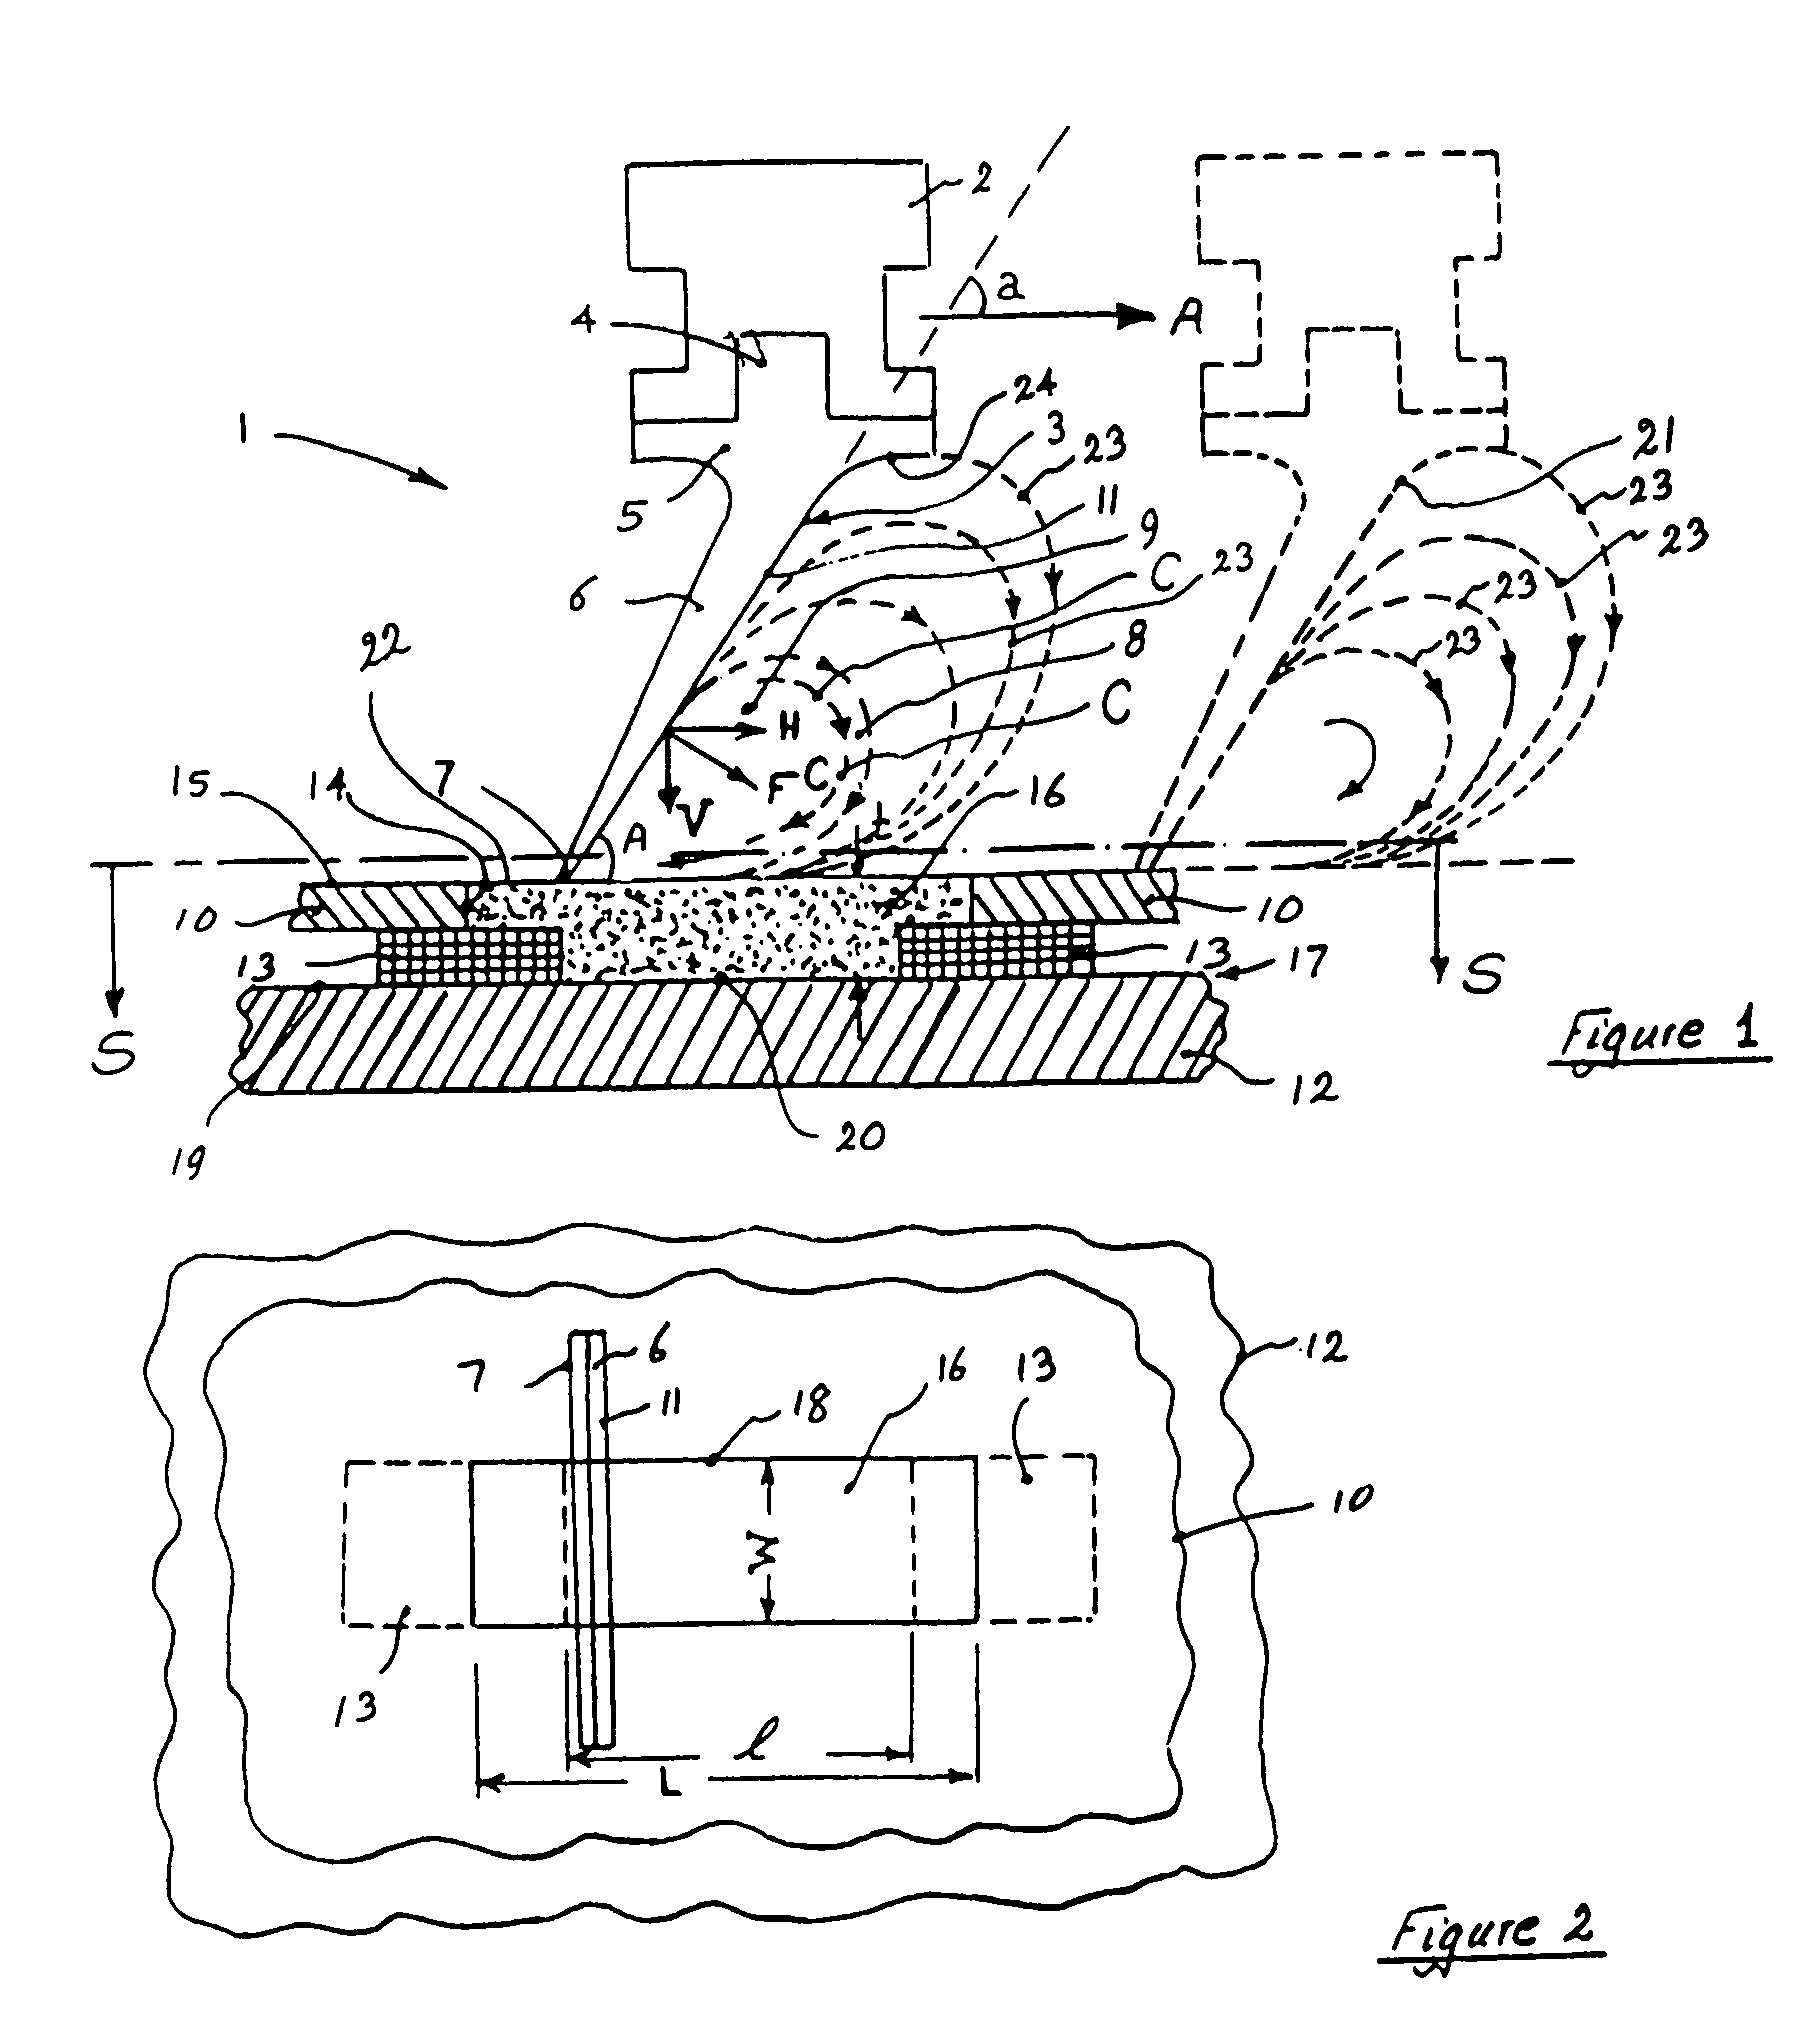 Method of applying a polymer thick-film resistive paste for making polymer thick-film resistor having improved tolerances